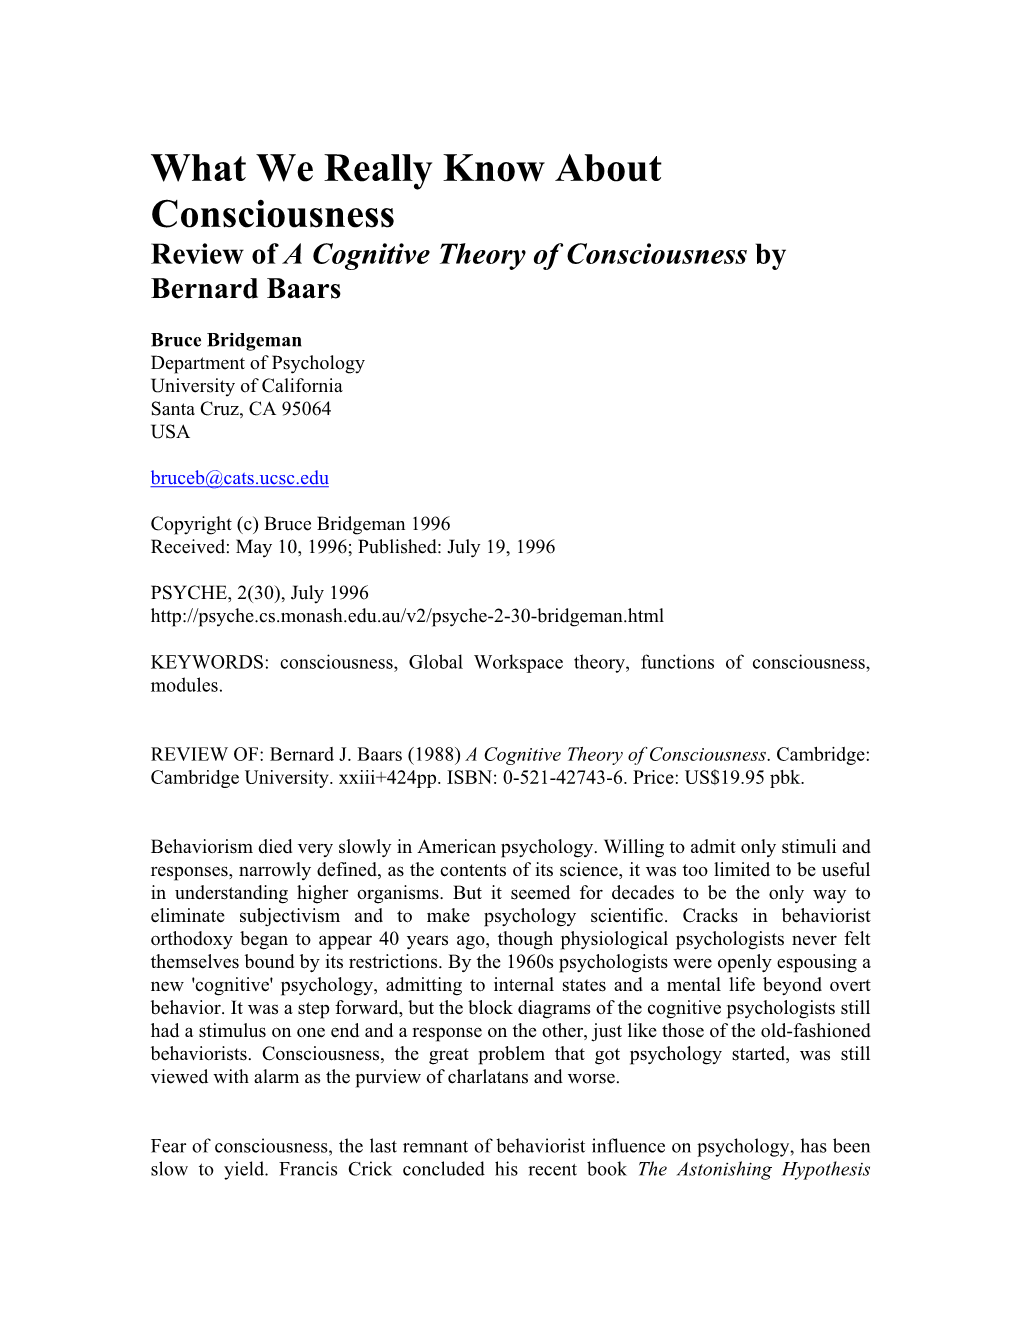 What We Really Know About Consciousness: Review of A